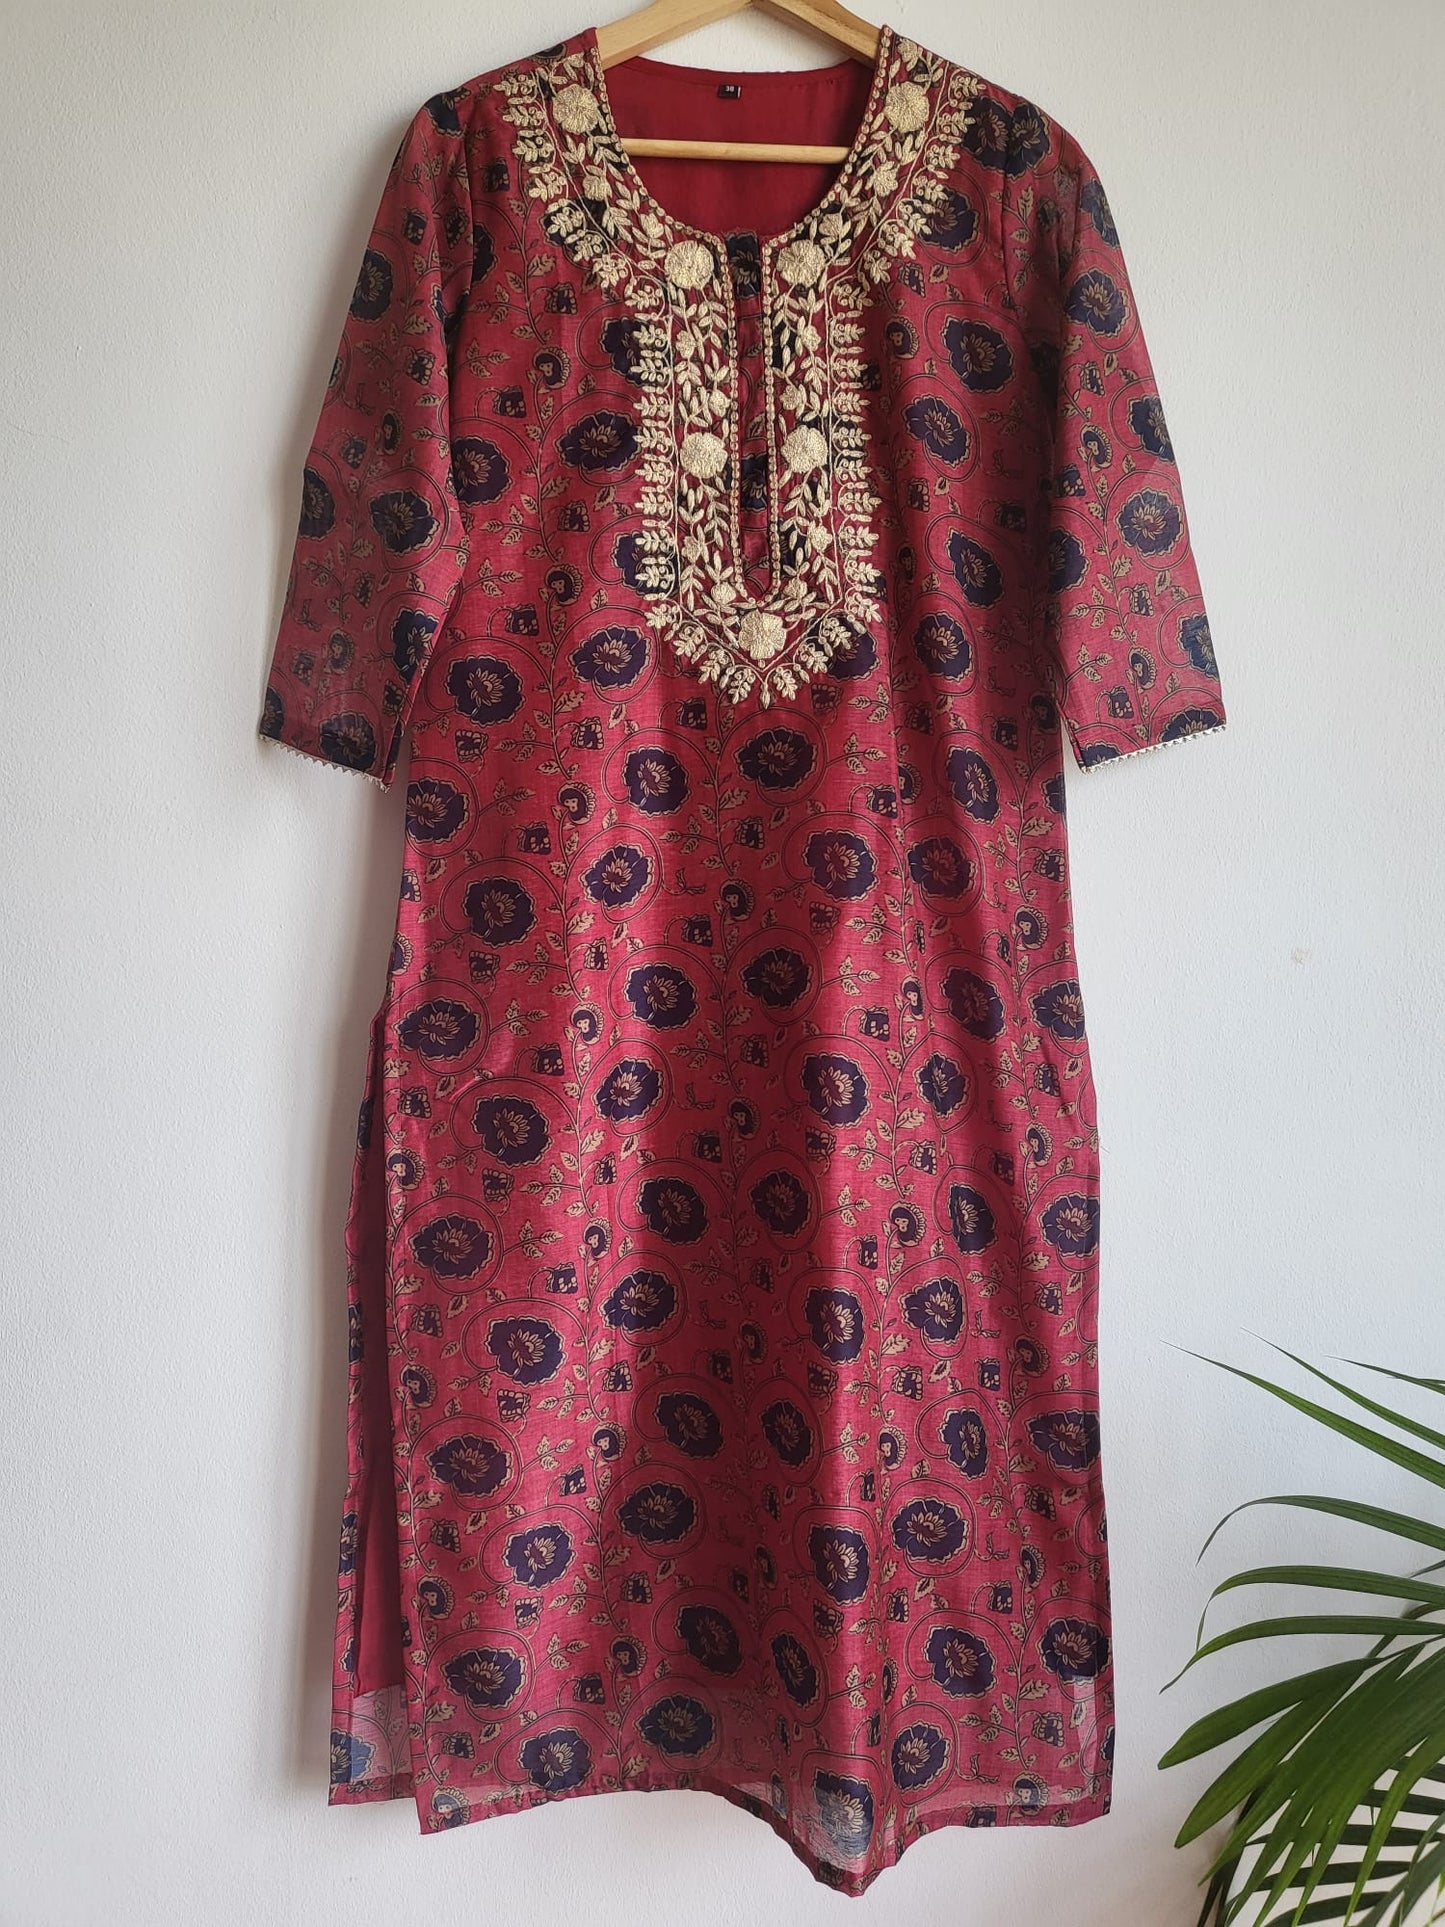 classy chanderi silk suit for women in Singapore. It is soft and comfortable